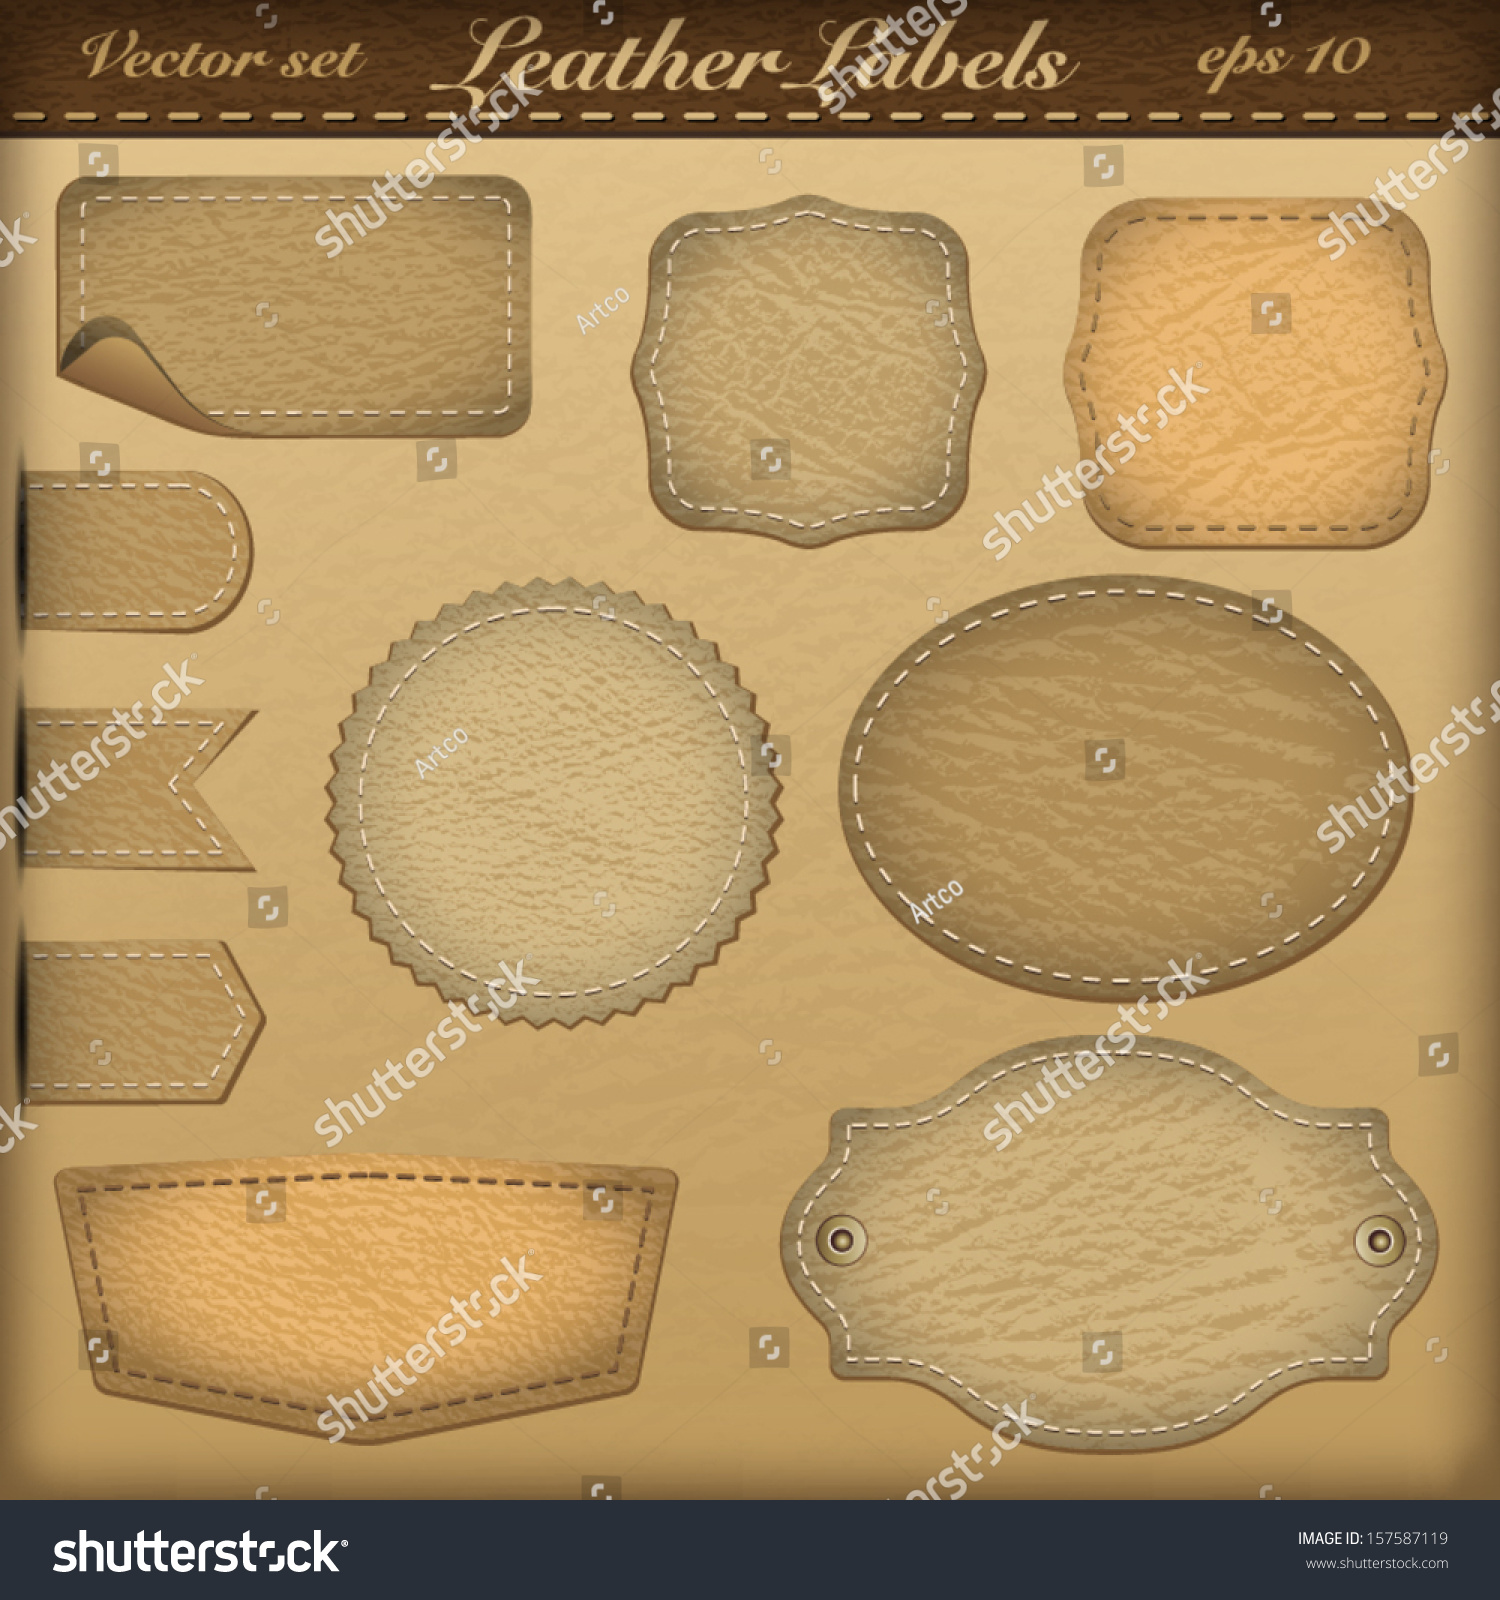 Set Of Labels With Stitching And Leather Texture In Brown Colors Stock ...